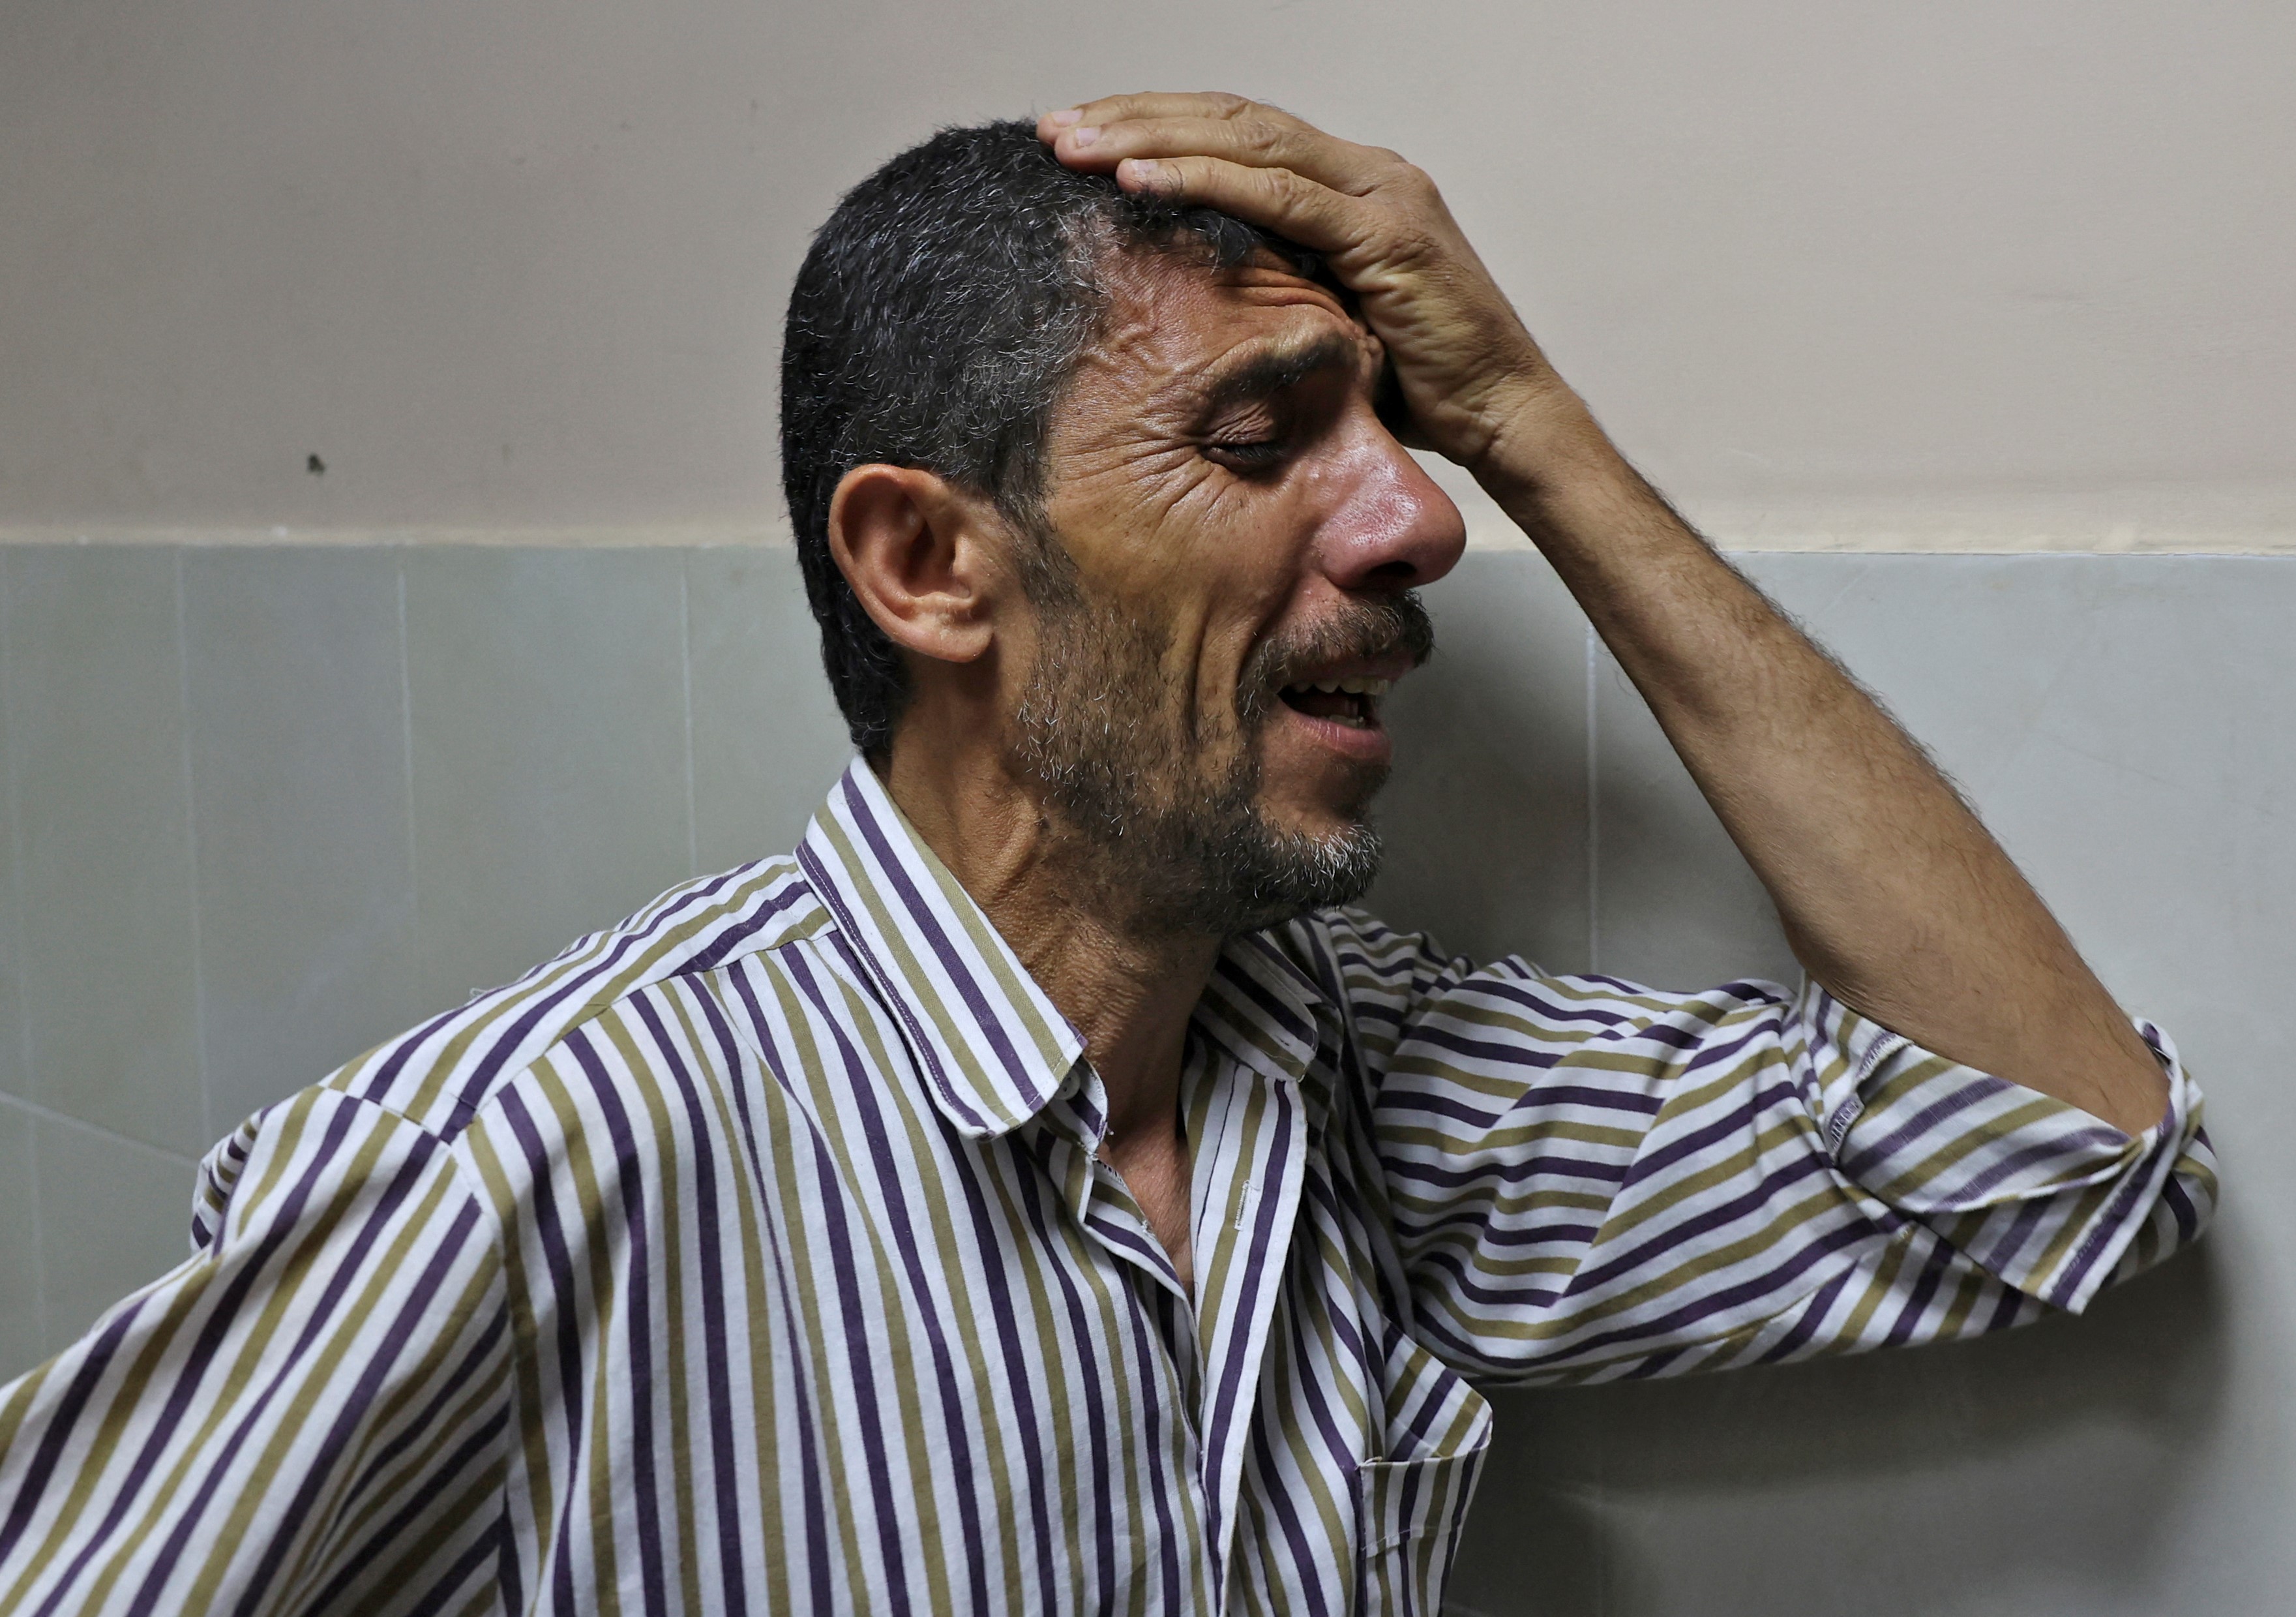 Mahmoud Obeid carries mourns his 7-year-old daughter Butheina, who was killed during an Israeli airstrike last night, at the morgue of the Indonesian hospital in Beit Lahia, in the northern Gaza Strip, on 16 May, 2021 (AFP)